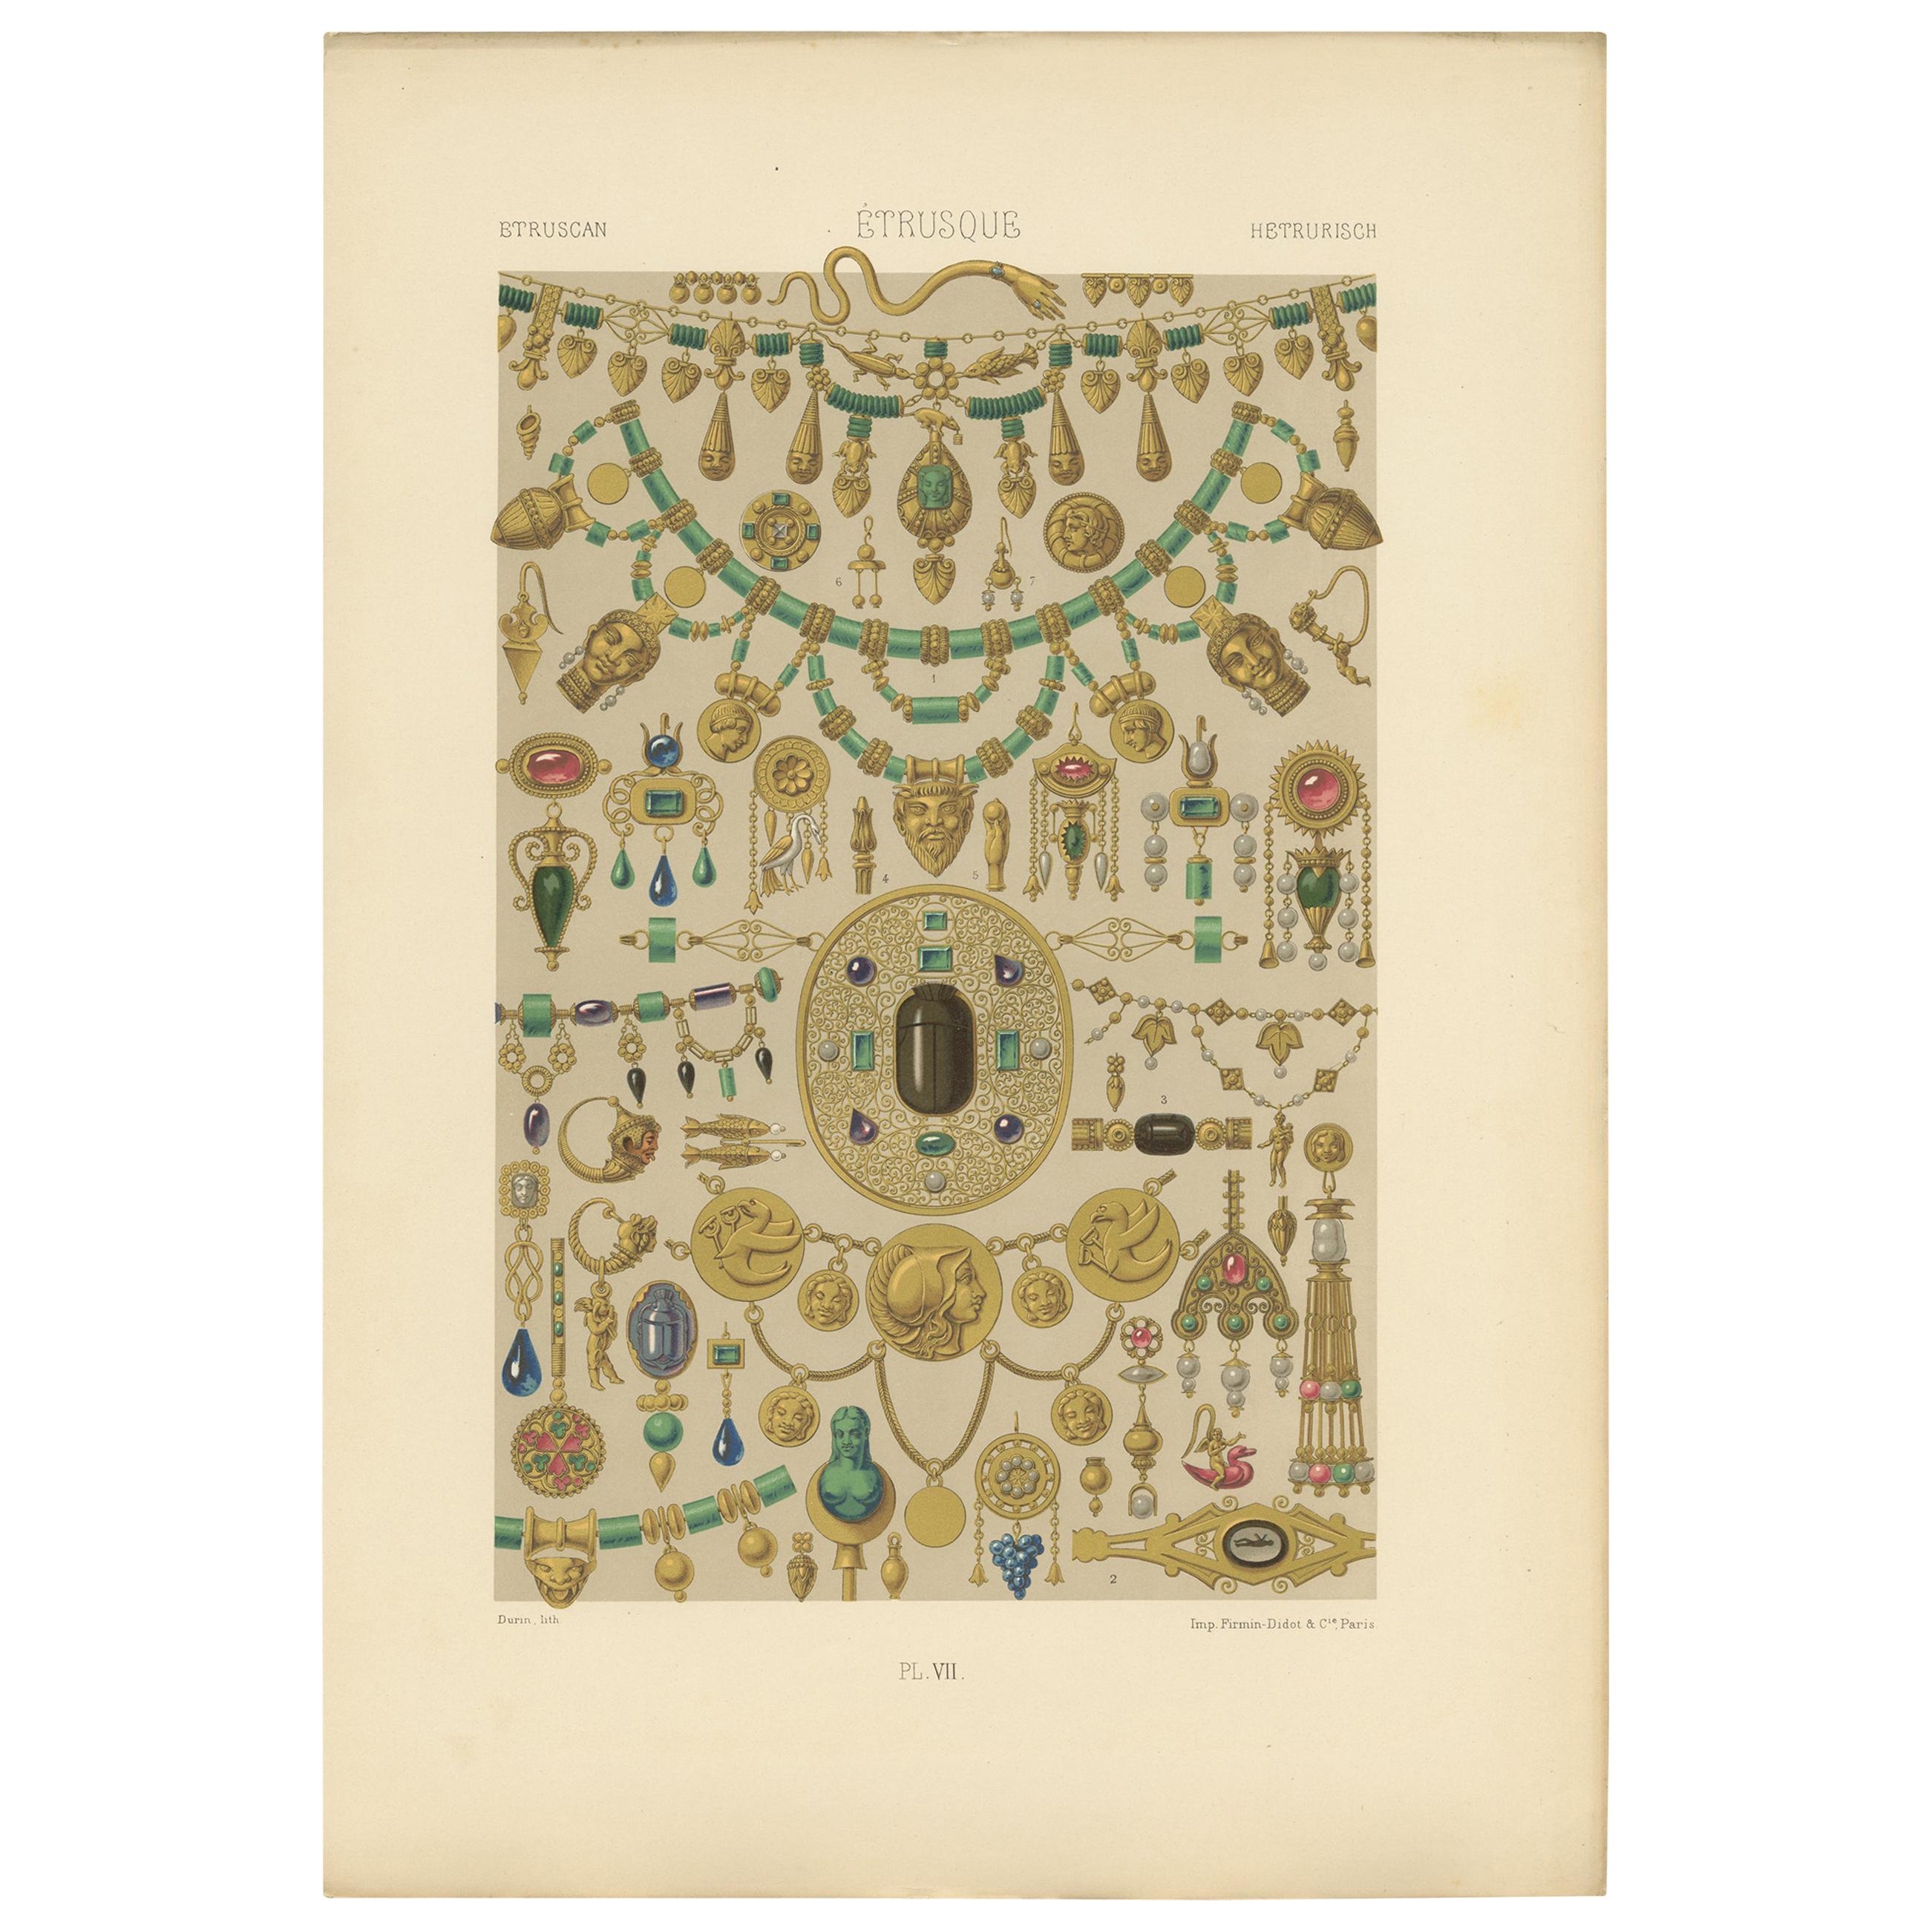 Pl. 7 Antique Print of Etruscan Ornaments by Racinet, circa 1890